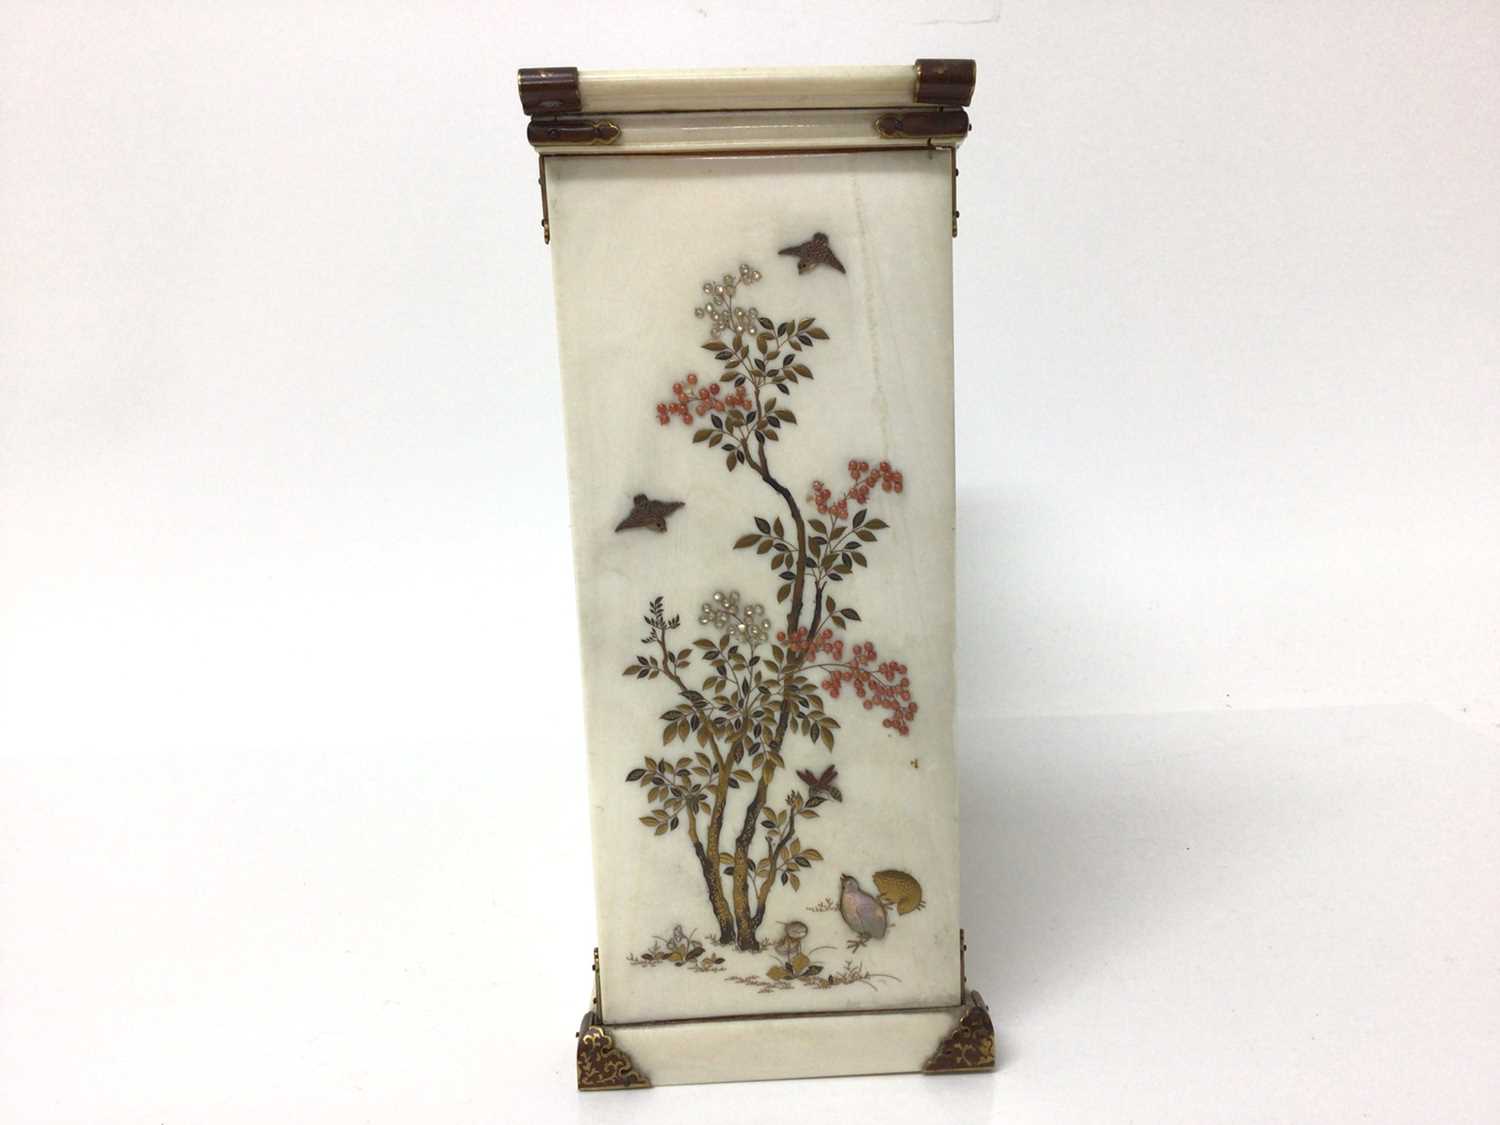 19th century Japanese ivory shibayama cabinet, finely decorated with birds and flowers, 20cm high (s - Image 4 of 10